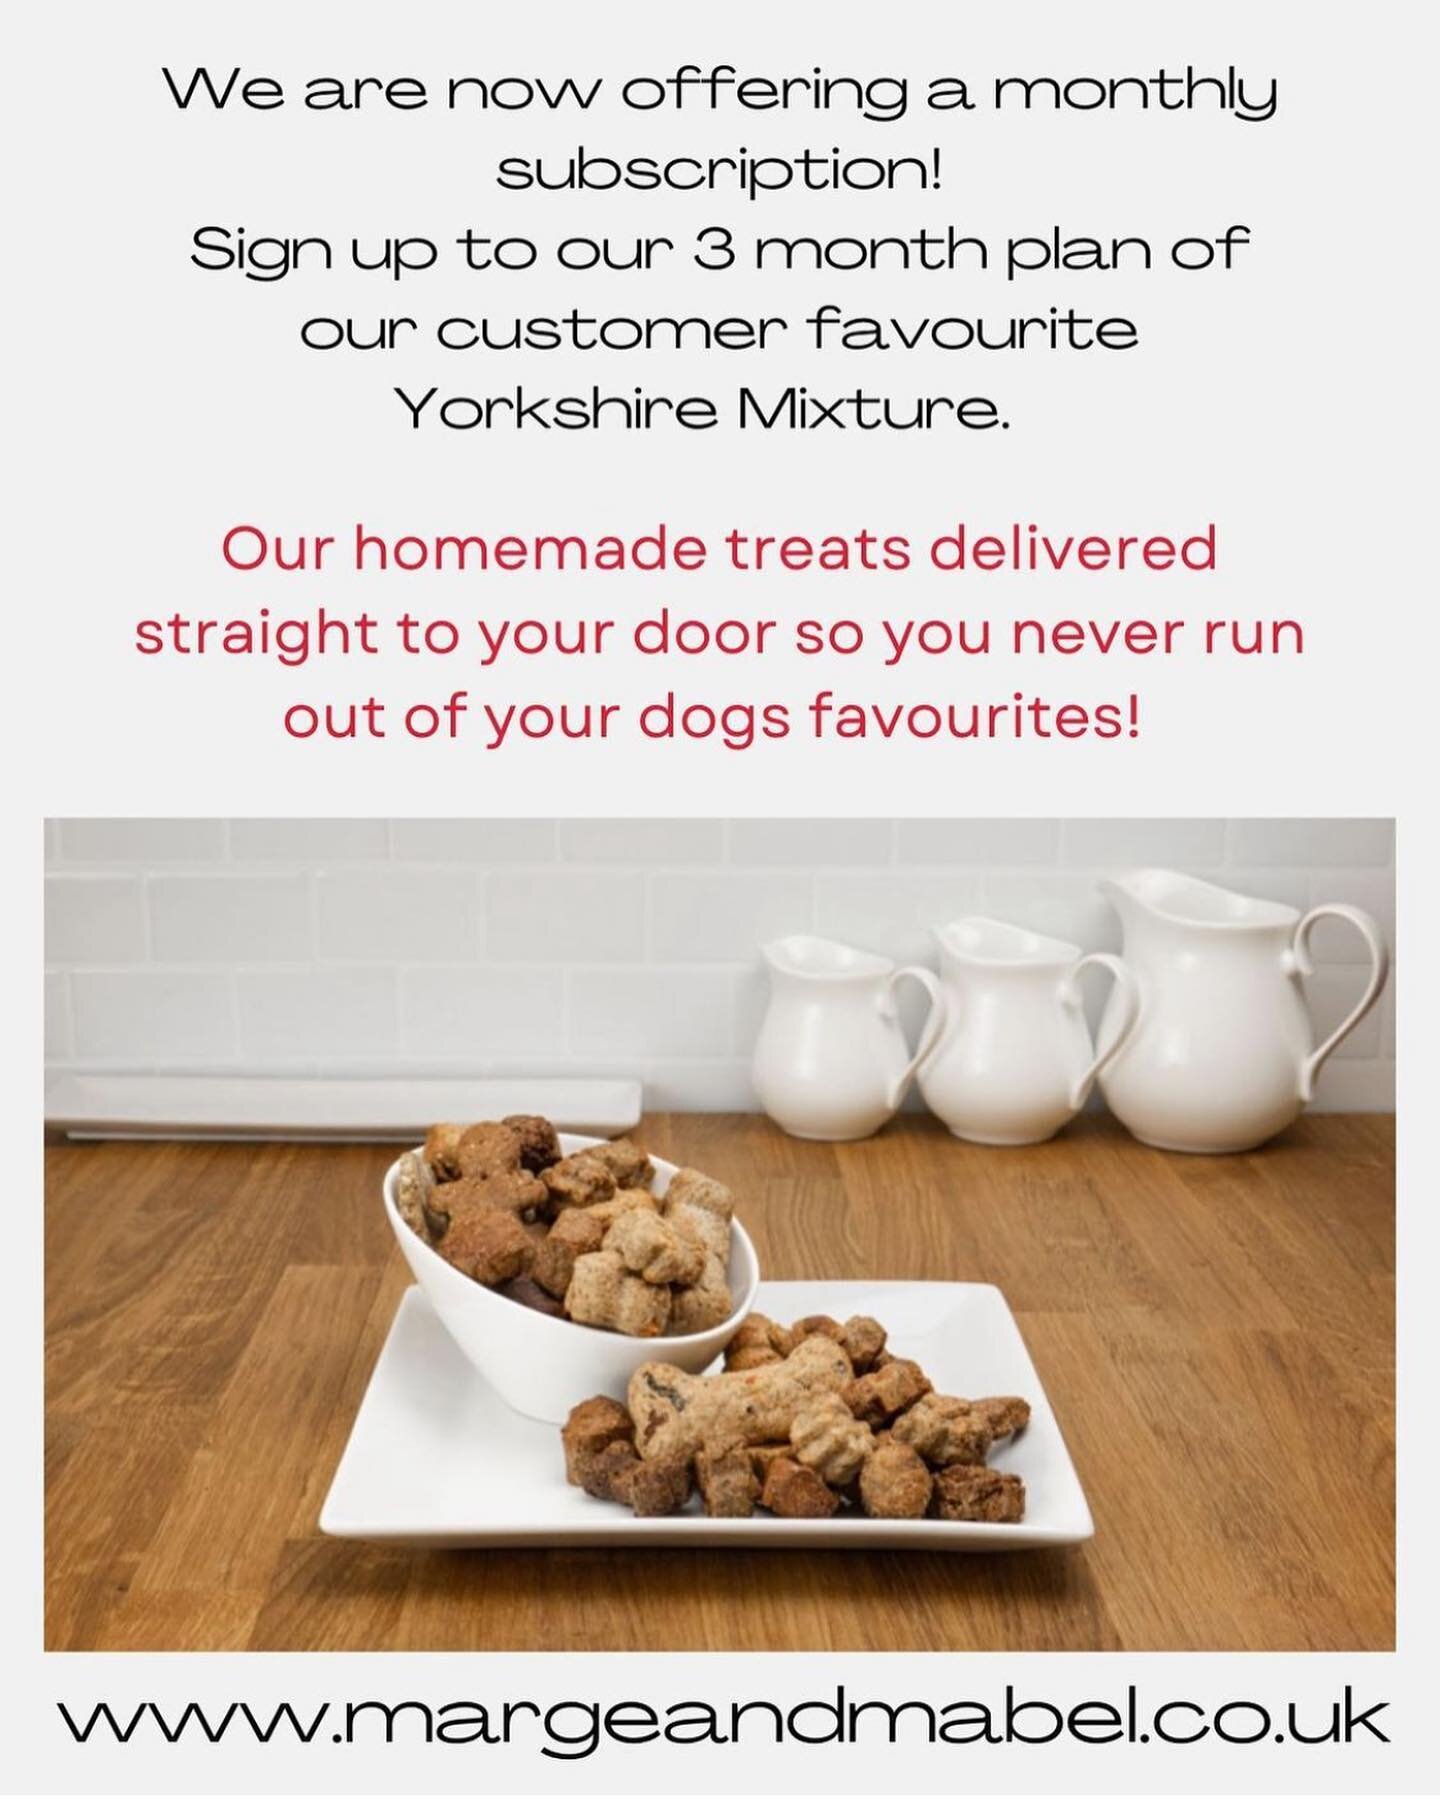 Sign up to our 3 month subscription plan to receive our customer favourite &lsquo;Yorkshire Mixture&rsquo; to get delivered direct to your door. 

Free delivery - try now with 20% off your first box use code TREATS20

Plus the first 20 people to sign